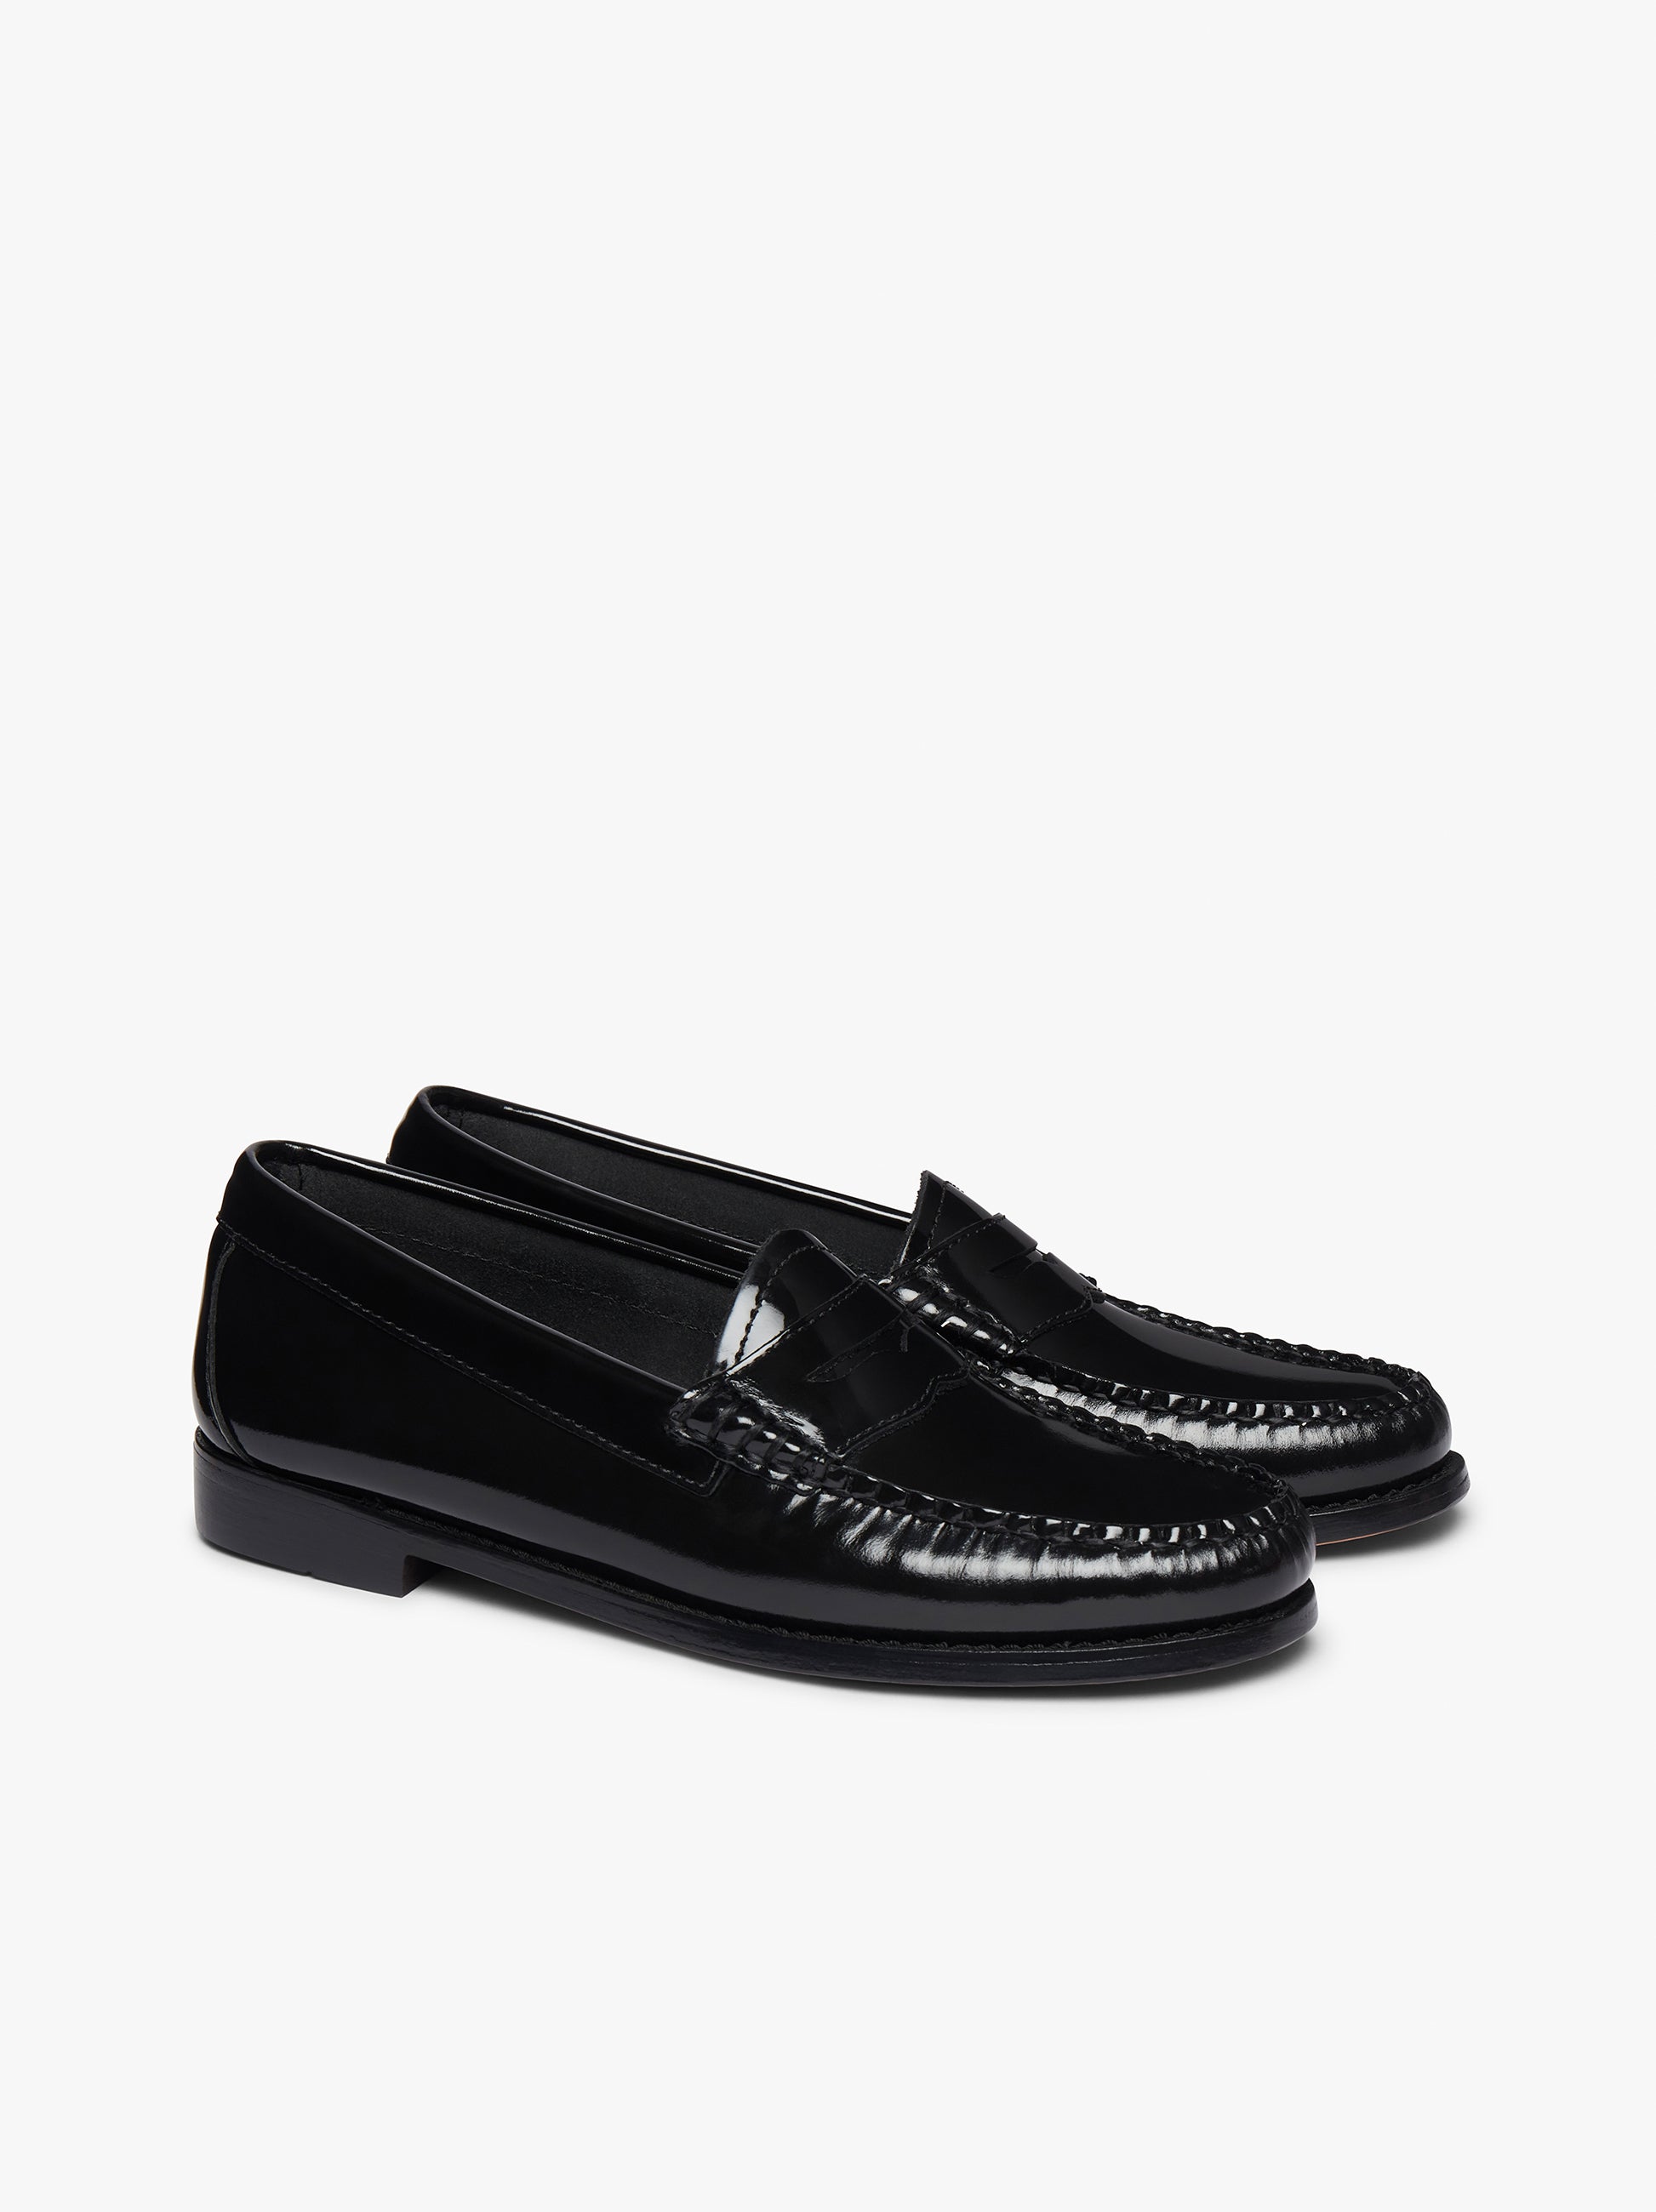 Black Patent Leather Loafers Womens | Black Patent Leather Loafers –  G.H.BASS 1876